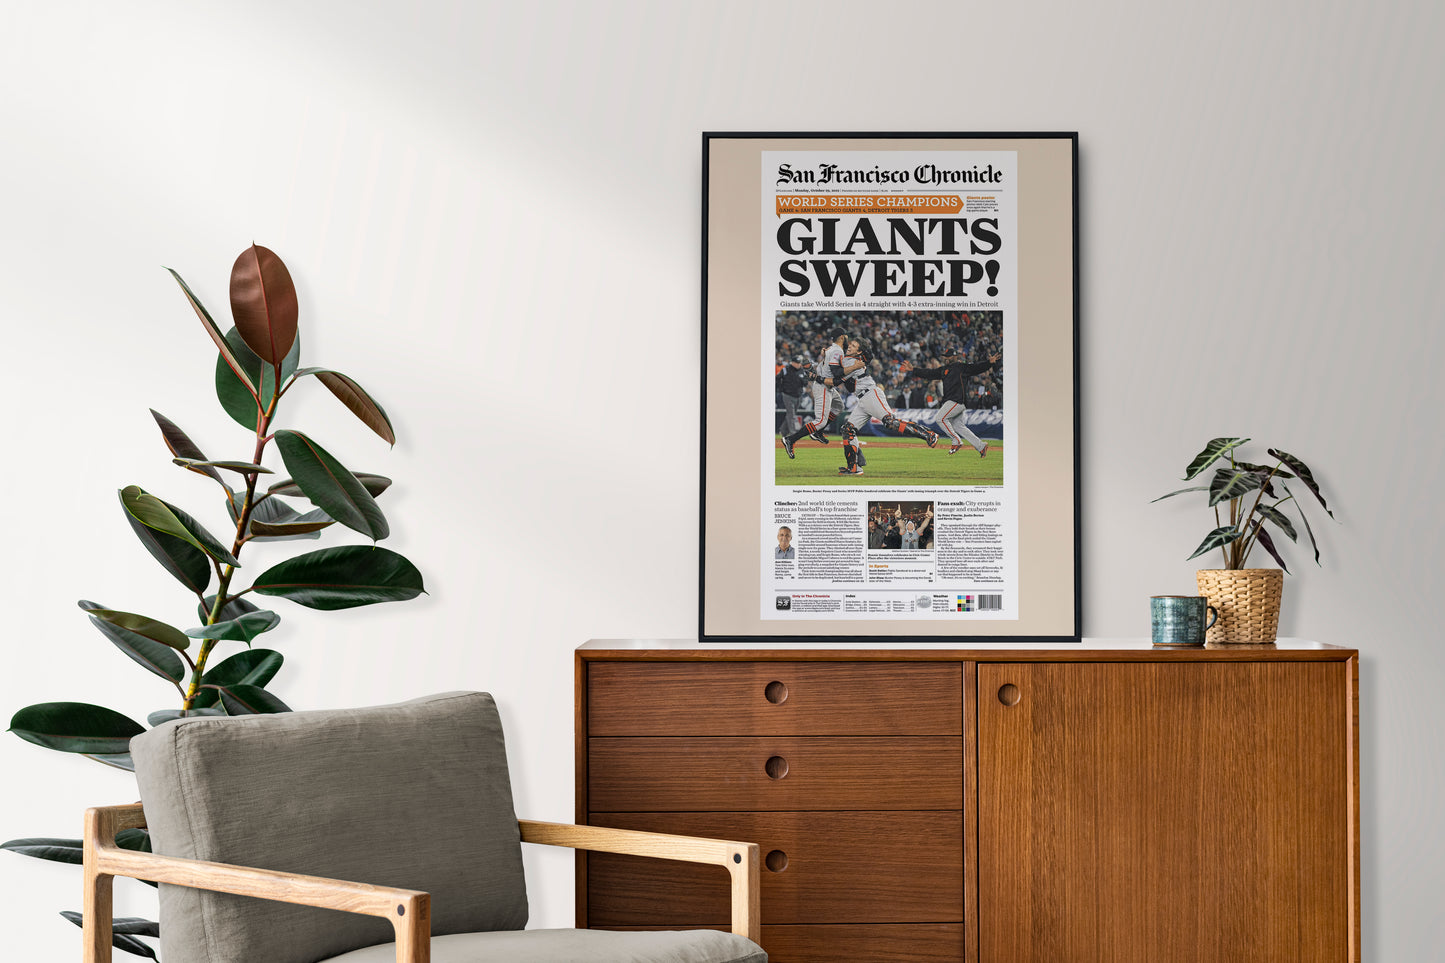 San Francisco Giants 2012 World Series MLB Champions Front Cover San Francisco Chronicle Newspaper Poster